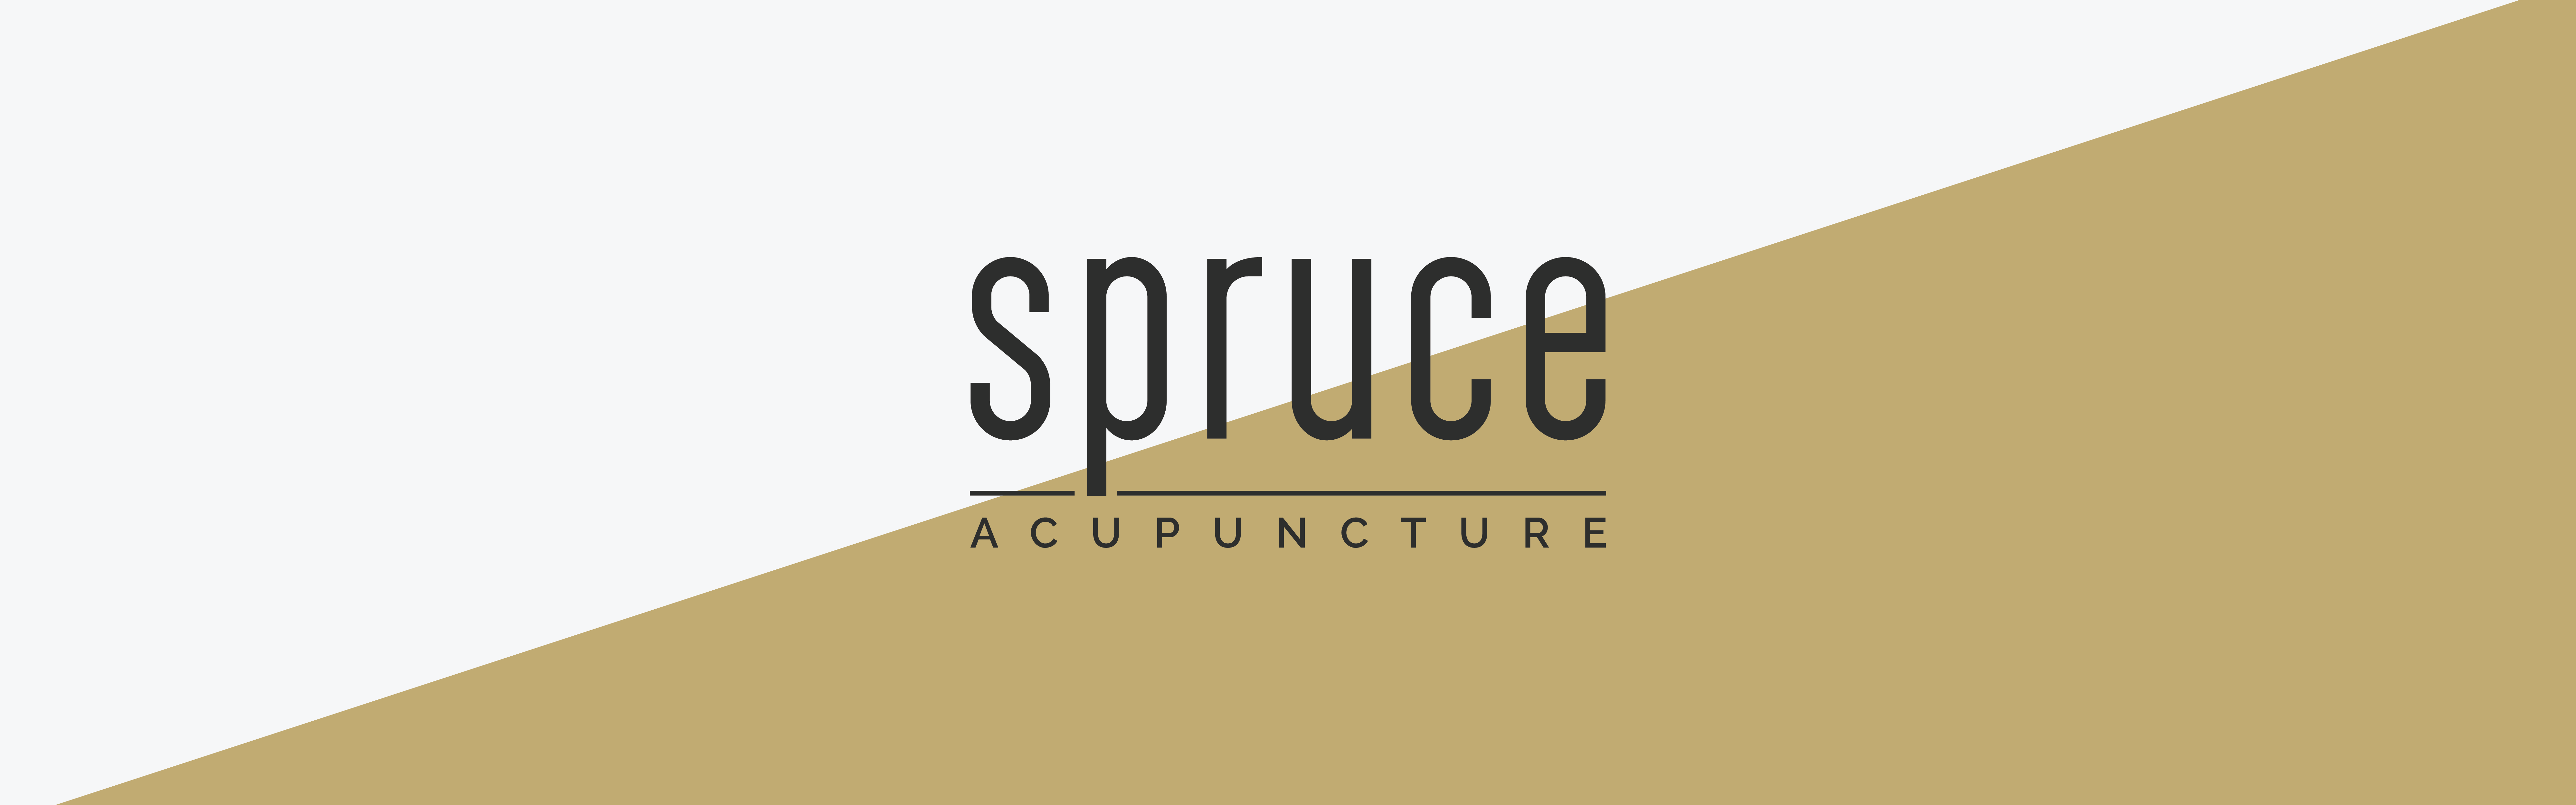 This is a simplistic logo for Spruce Acupuncture, featuring a two-tone background divided diagonally with stylized text in the center.